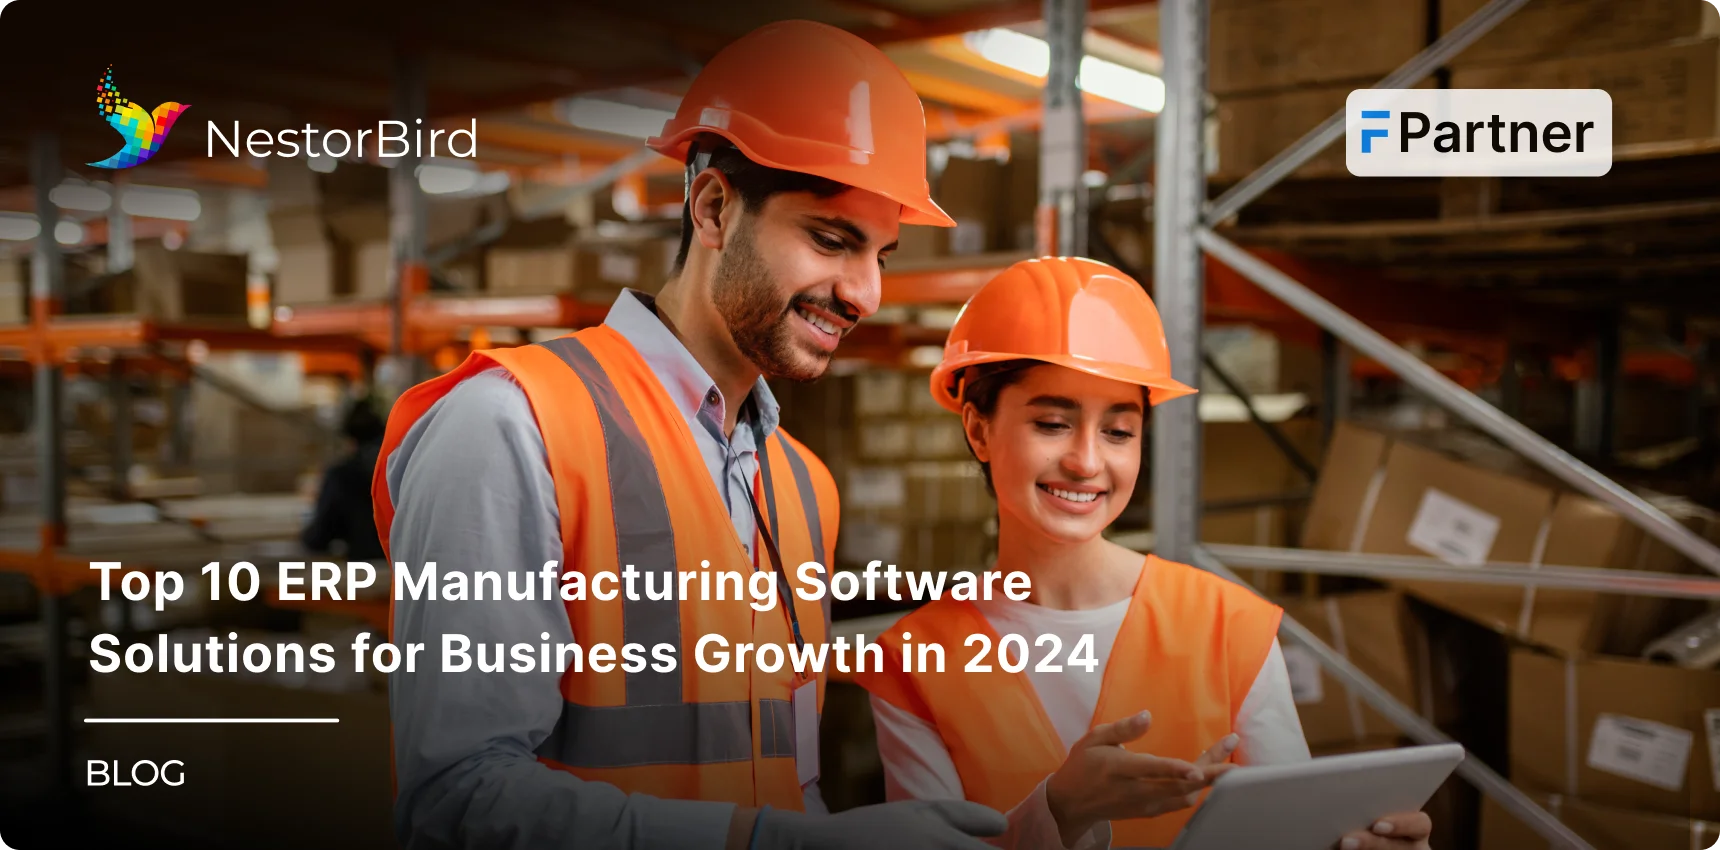 Top 10 ERP Manufacturing Software Solutions for Business Growth in 2024